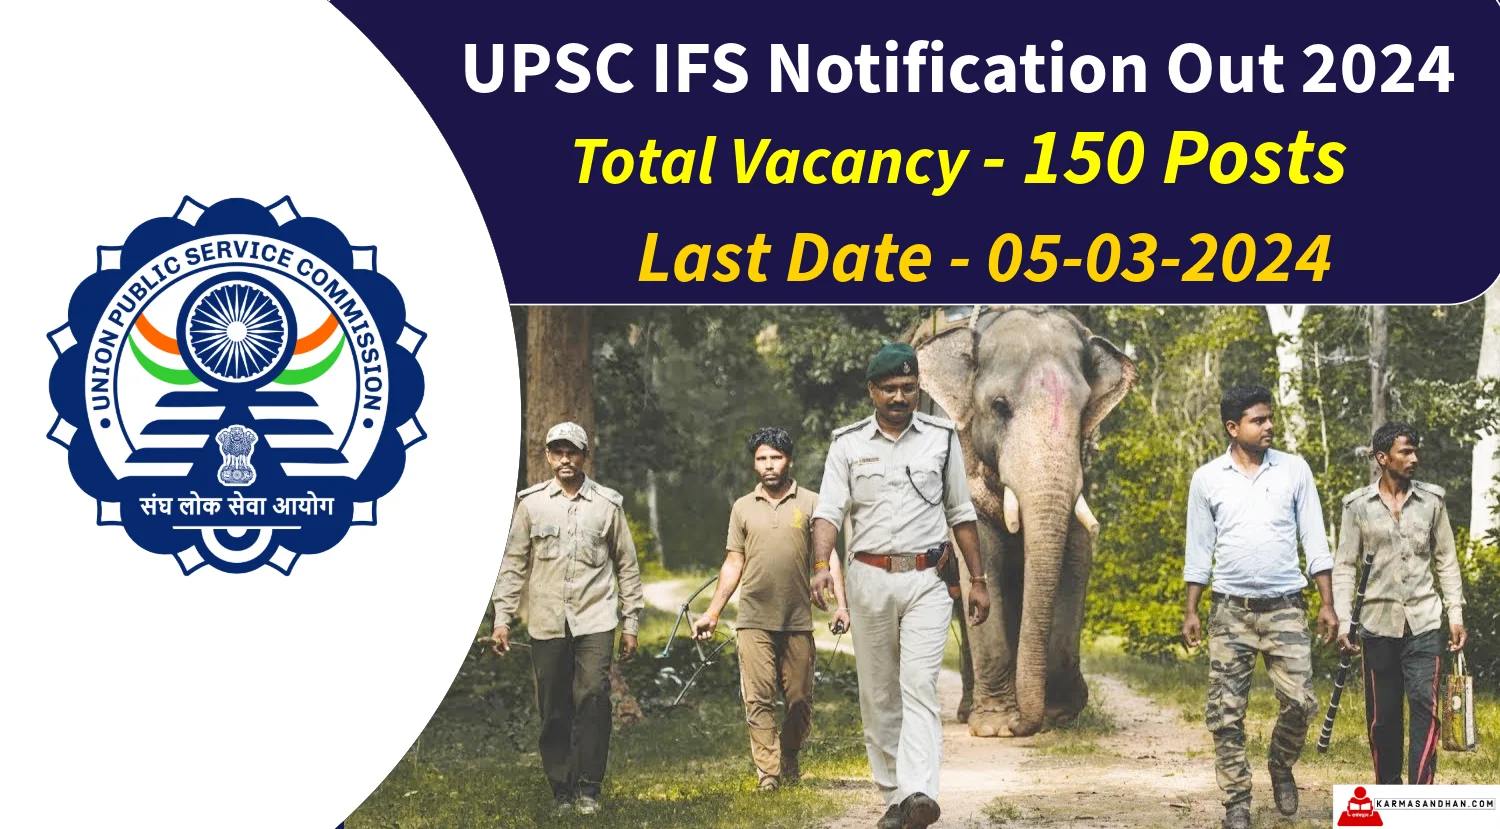 UPSC IFS Notification Out 2024, Check Exam Date, Vacancy and Application Process Now – Karmasandhan